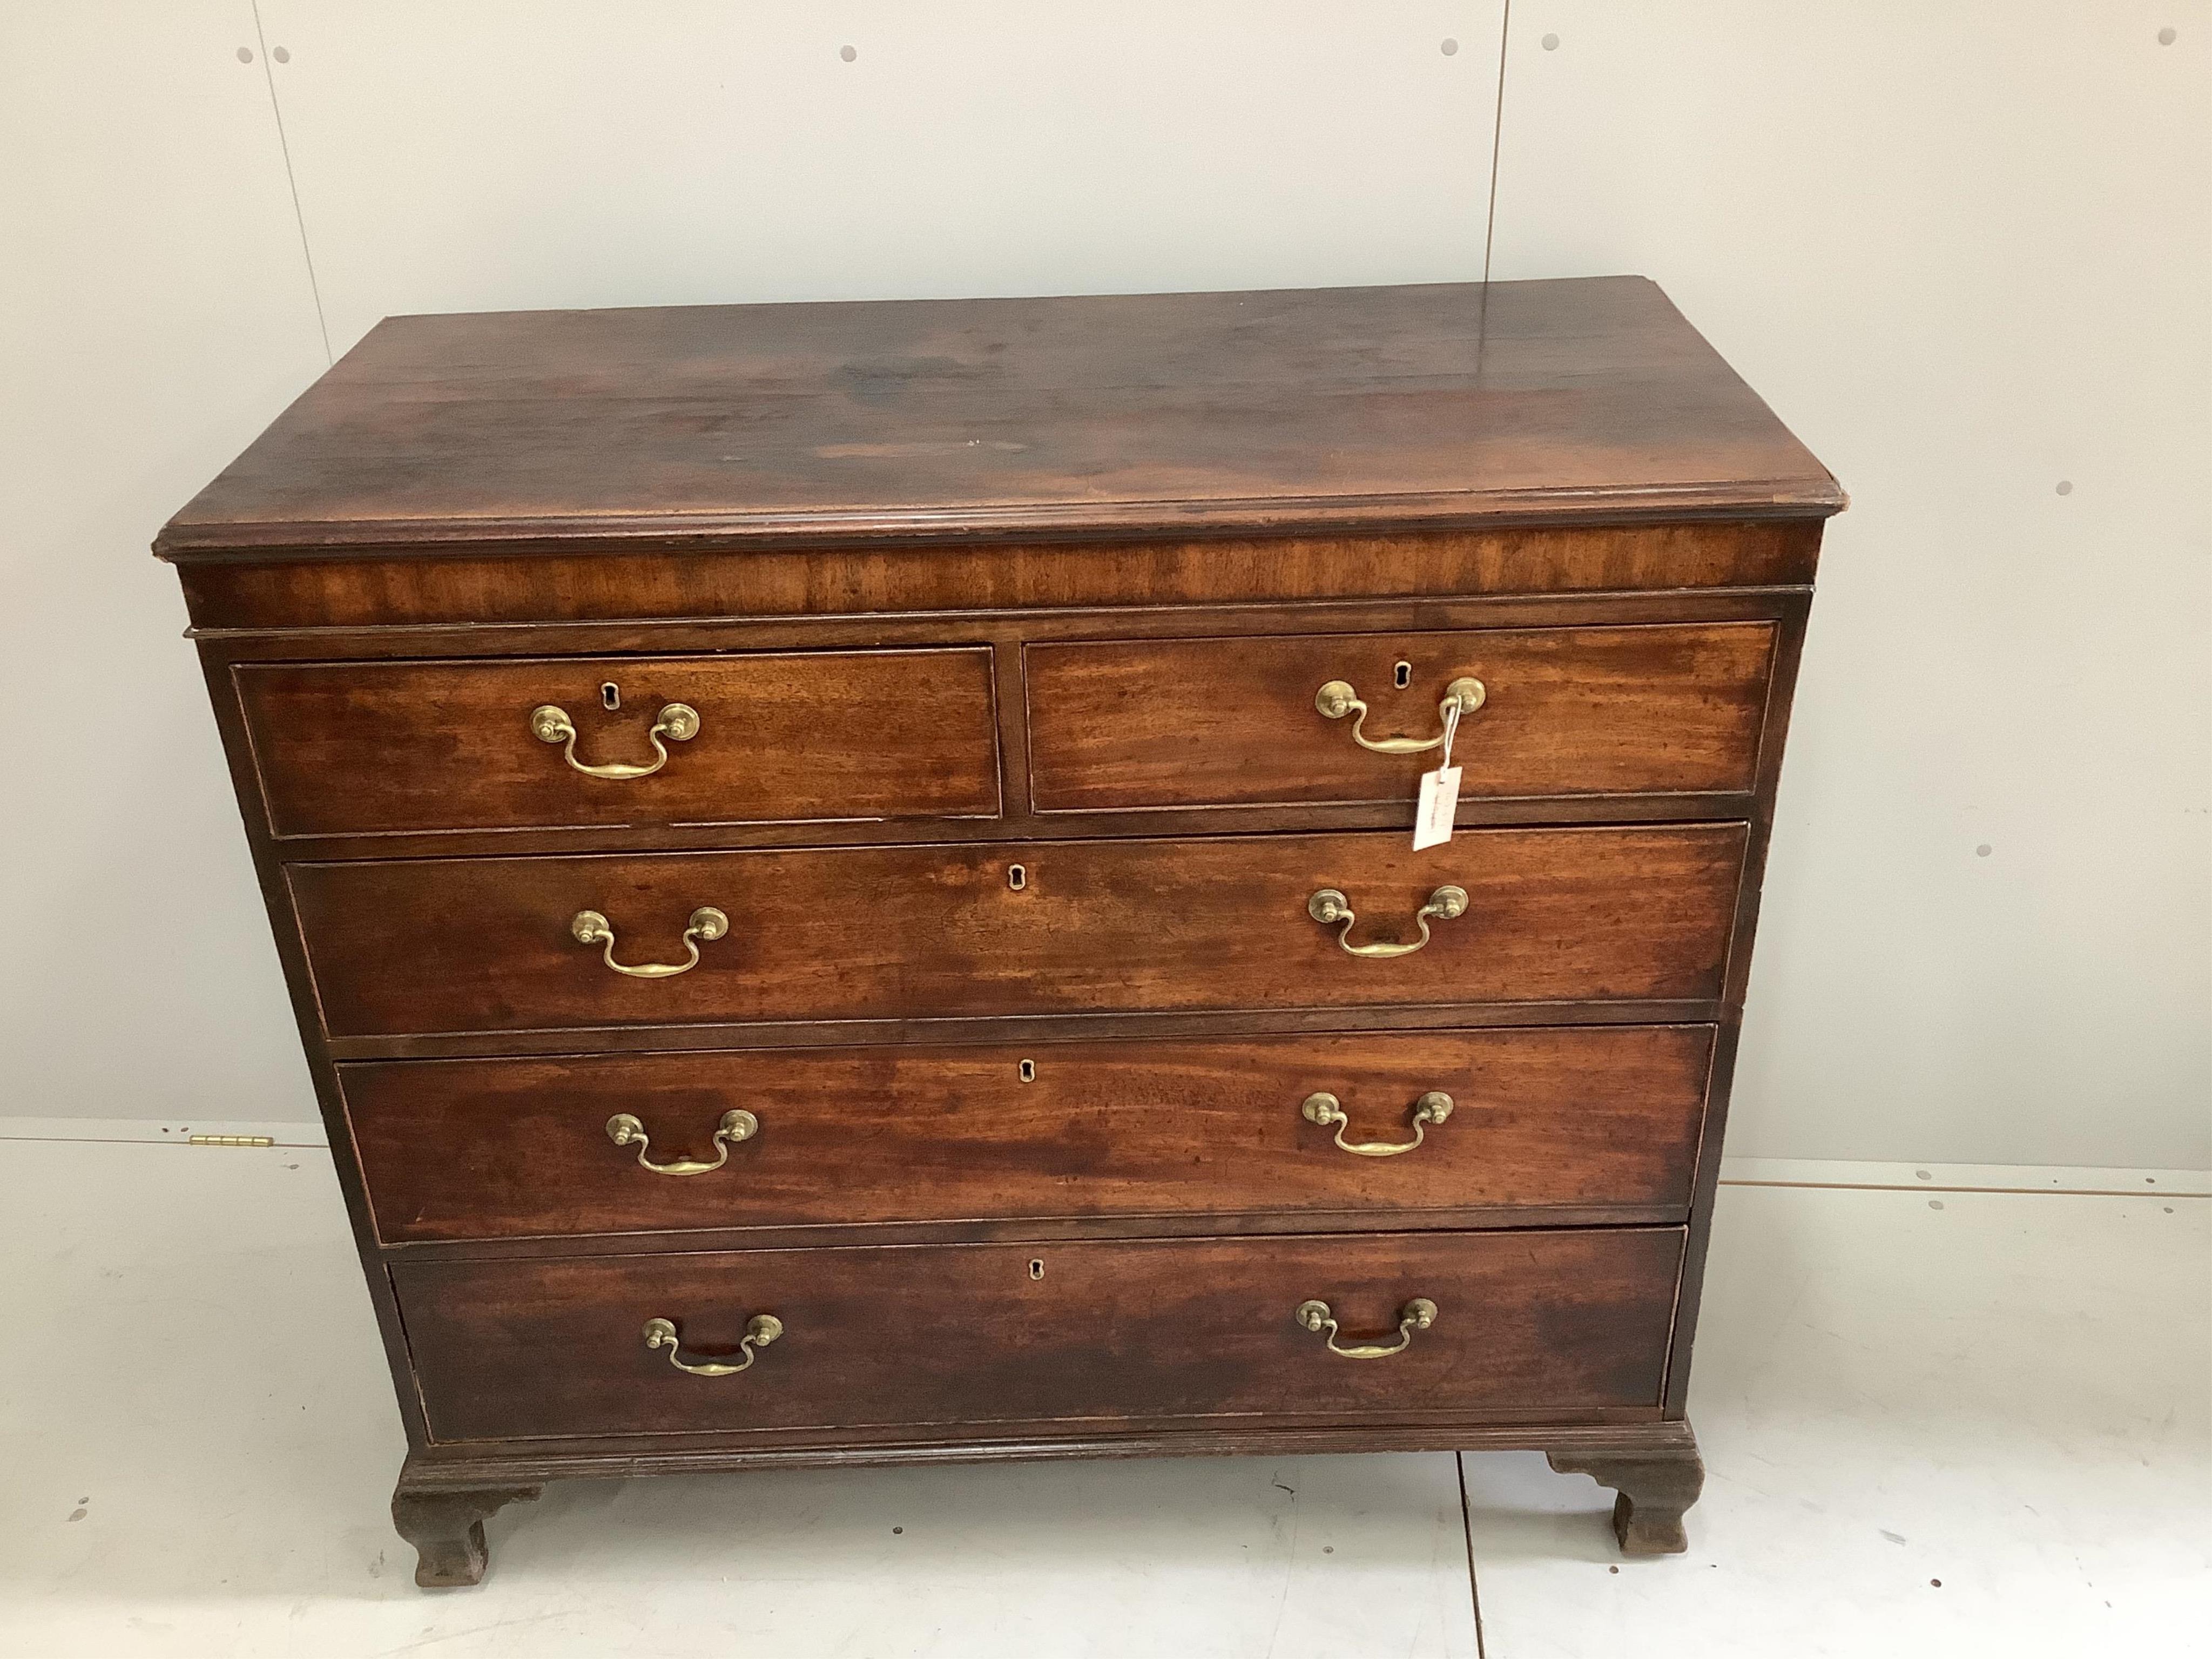 A George III mahogany chest of five drawers, width 124cm, depth 56cm, height 113cm. Condition - fair